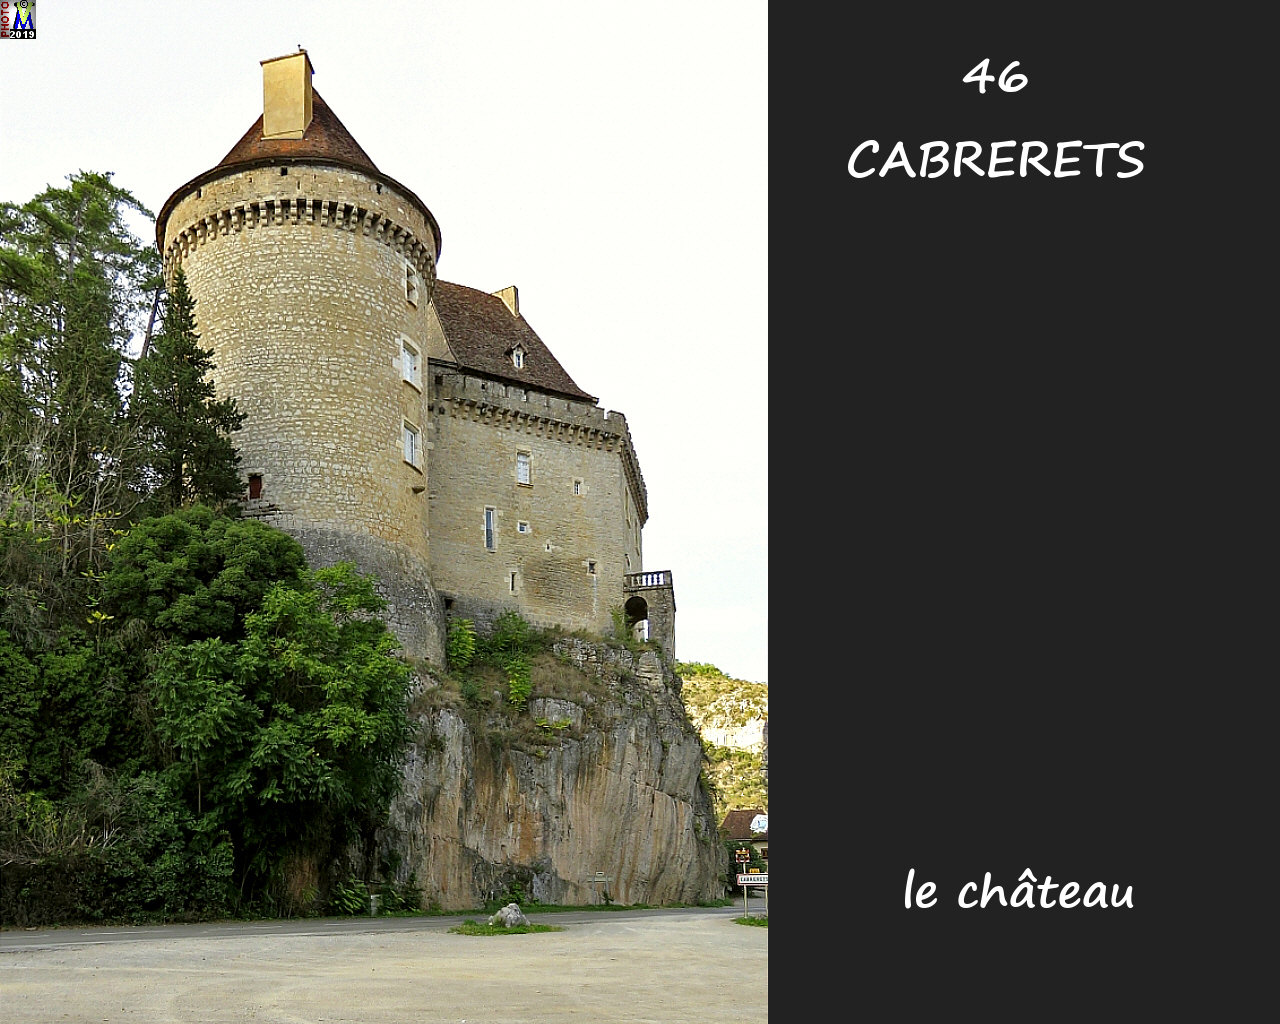 46CABRERETS_chateau_104.jpg